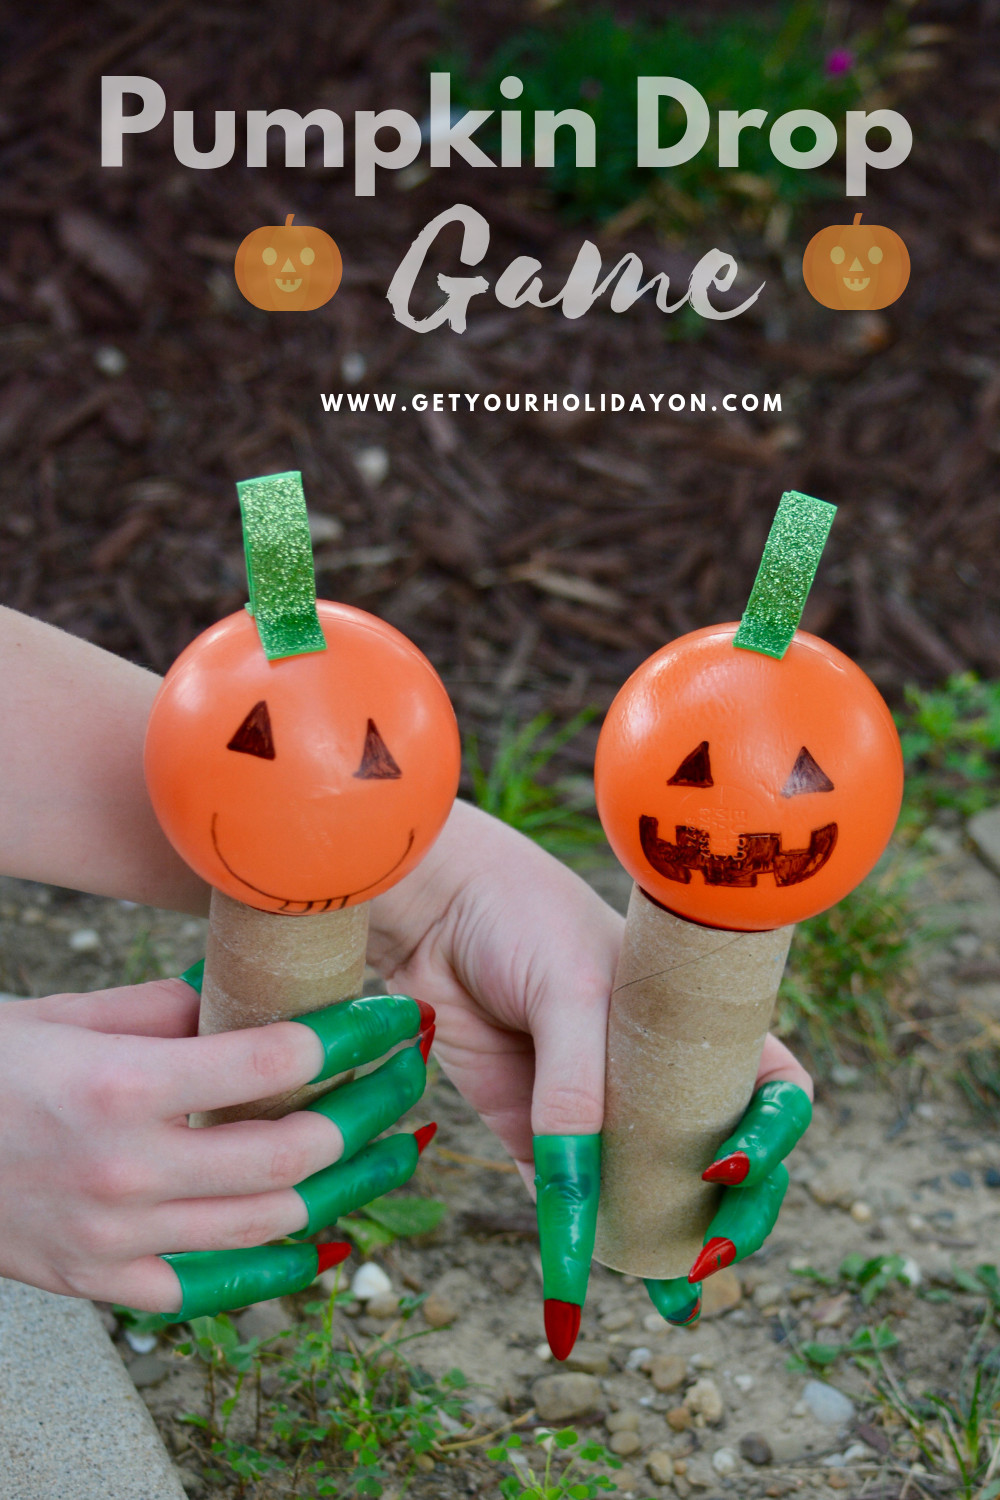 Halloween Party Ideas For 5Th Graders
 Pumpkin Drop Game for Halloween With images